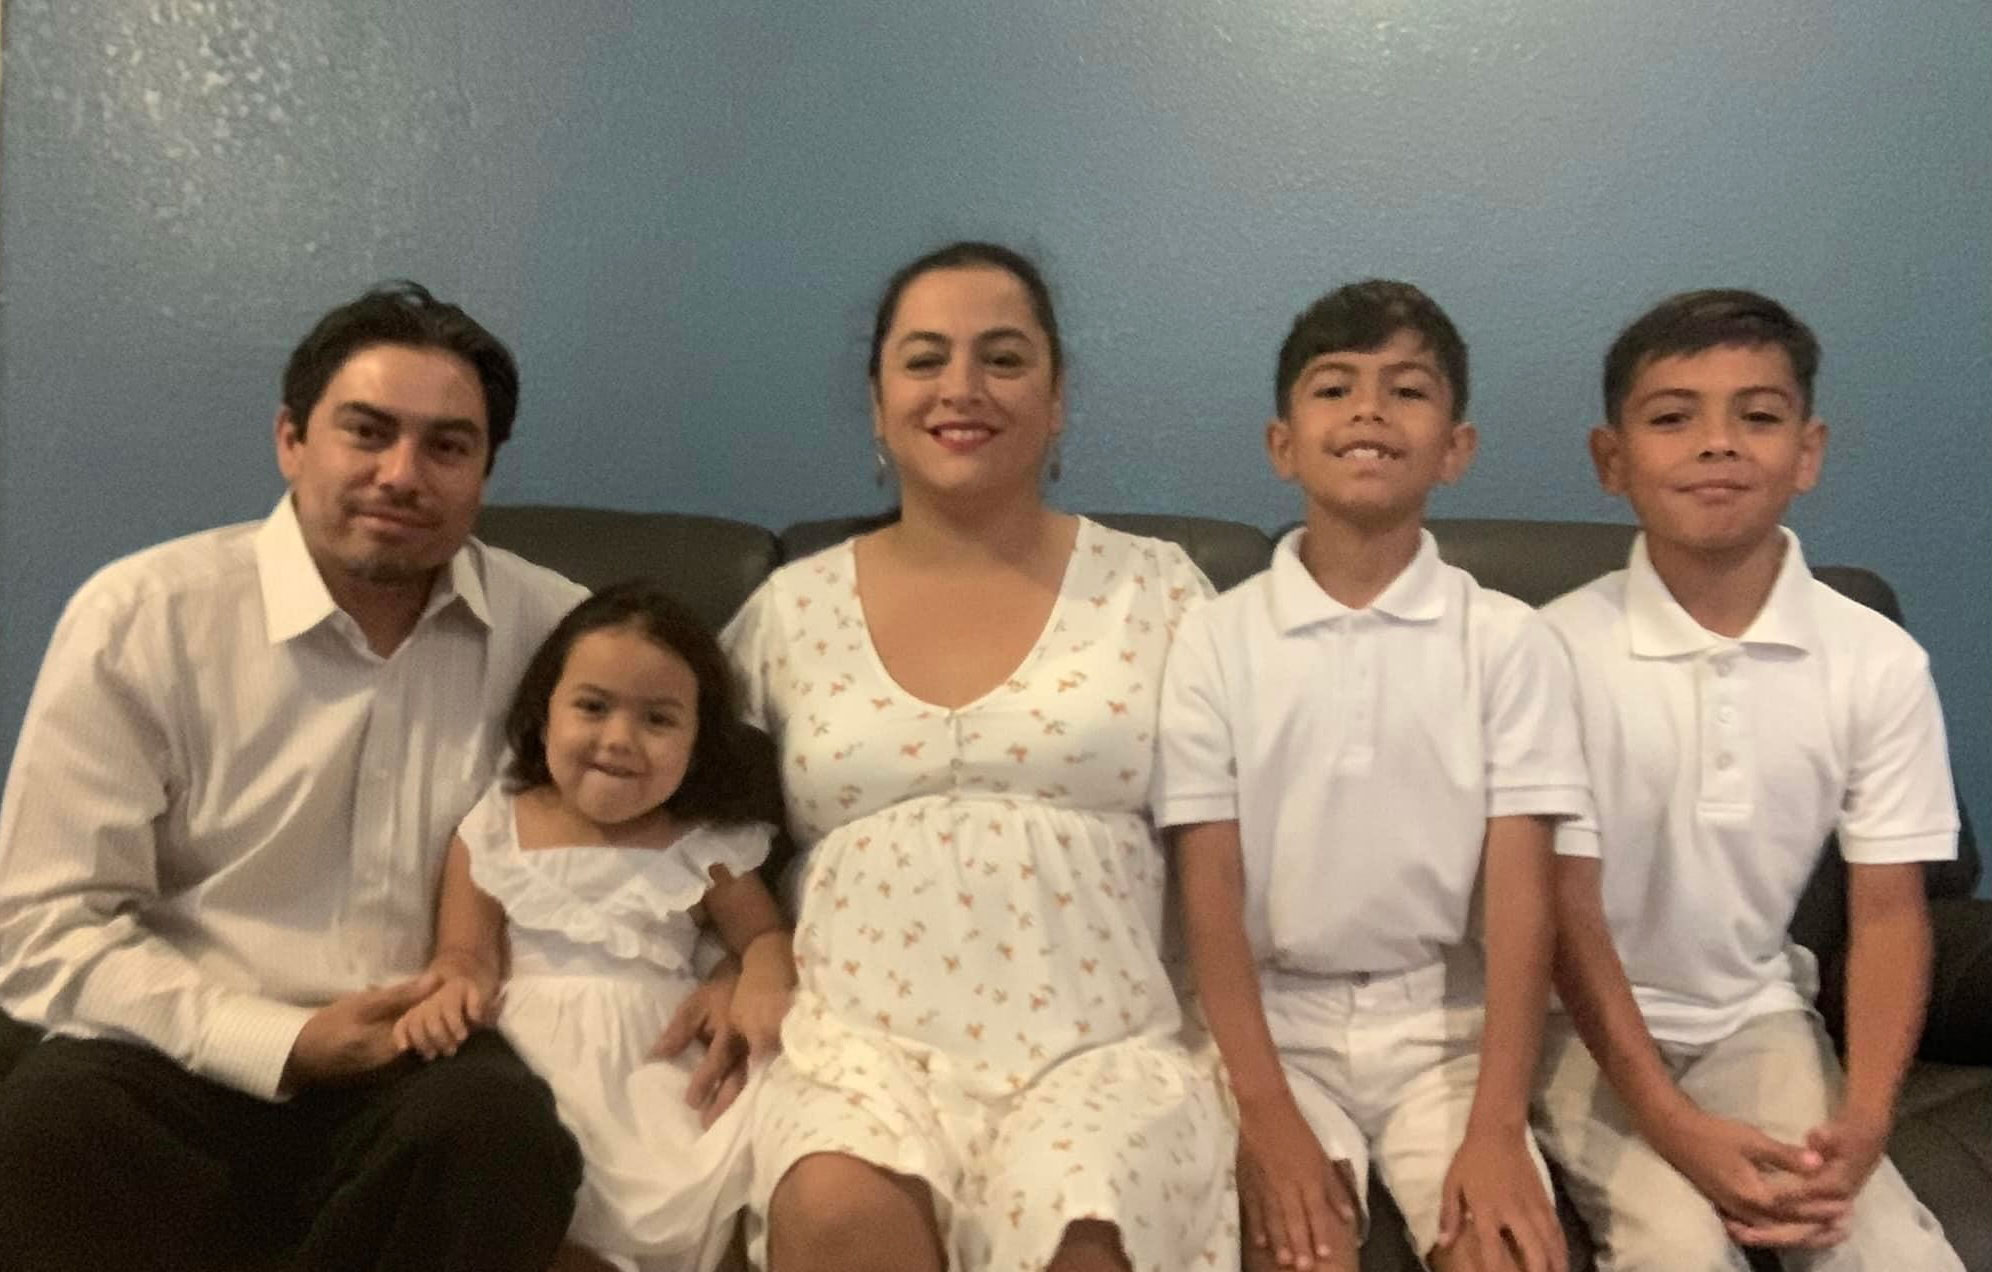 Melanie Cardenas (right) with her husband and three children: David, 10 years old, Dylan, 8 years old, and Jordan, 2 years old